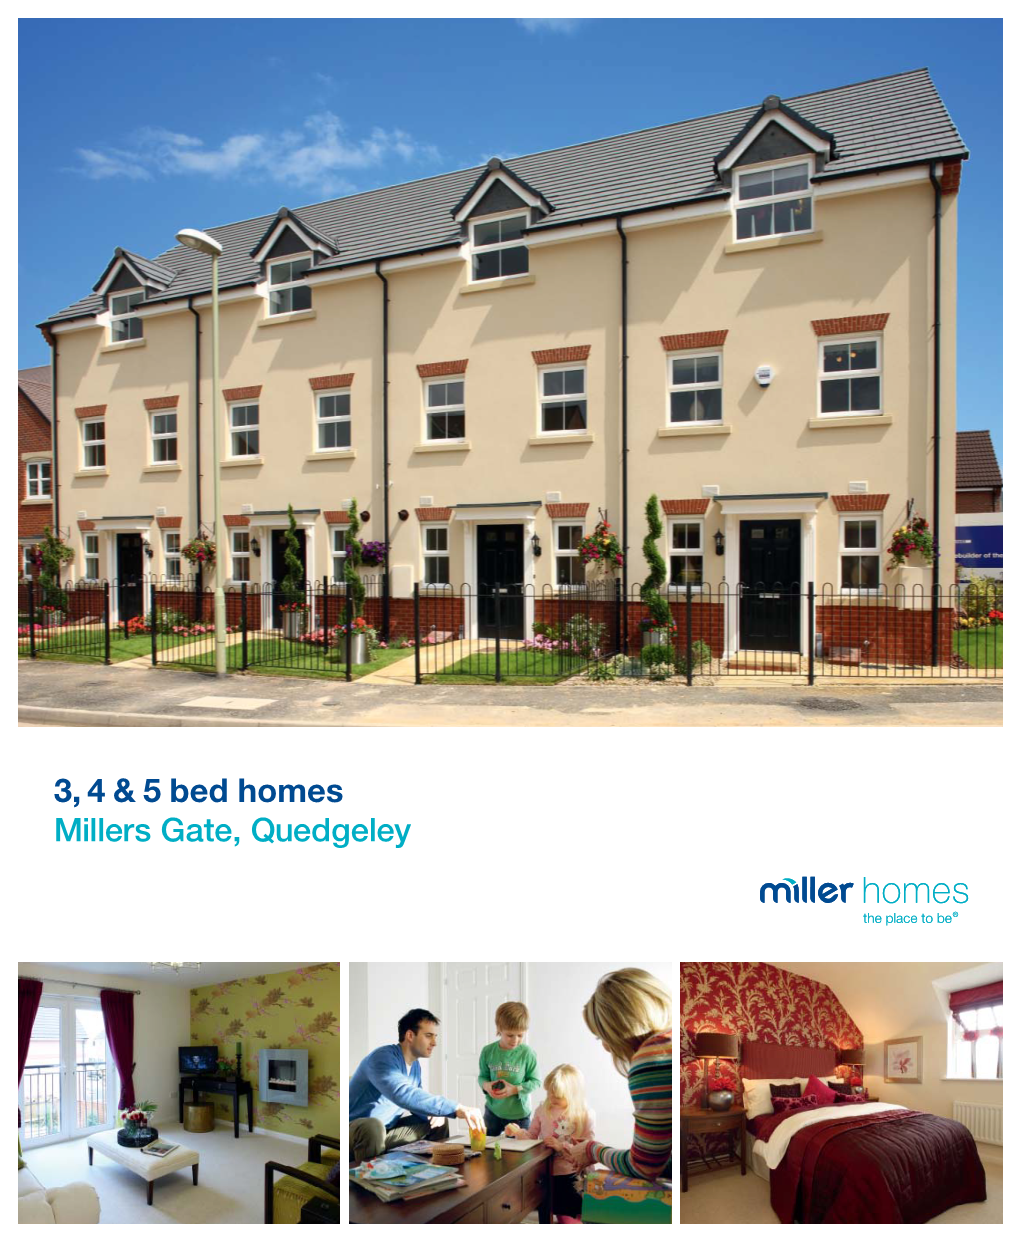 3, 4 & 5 Bed Homes